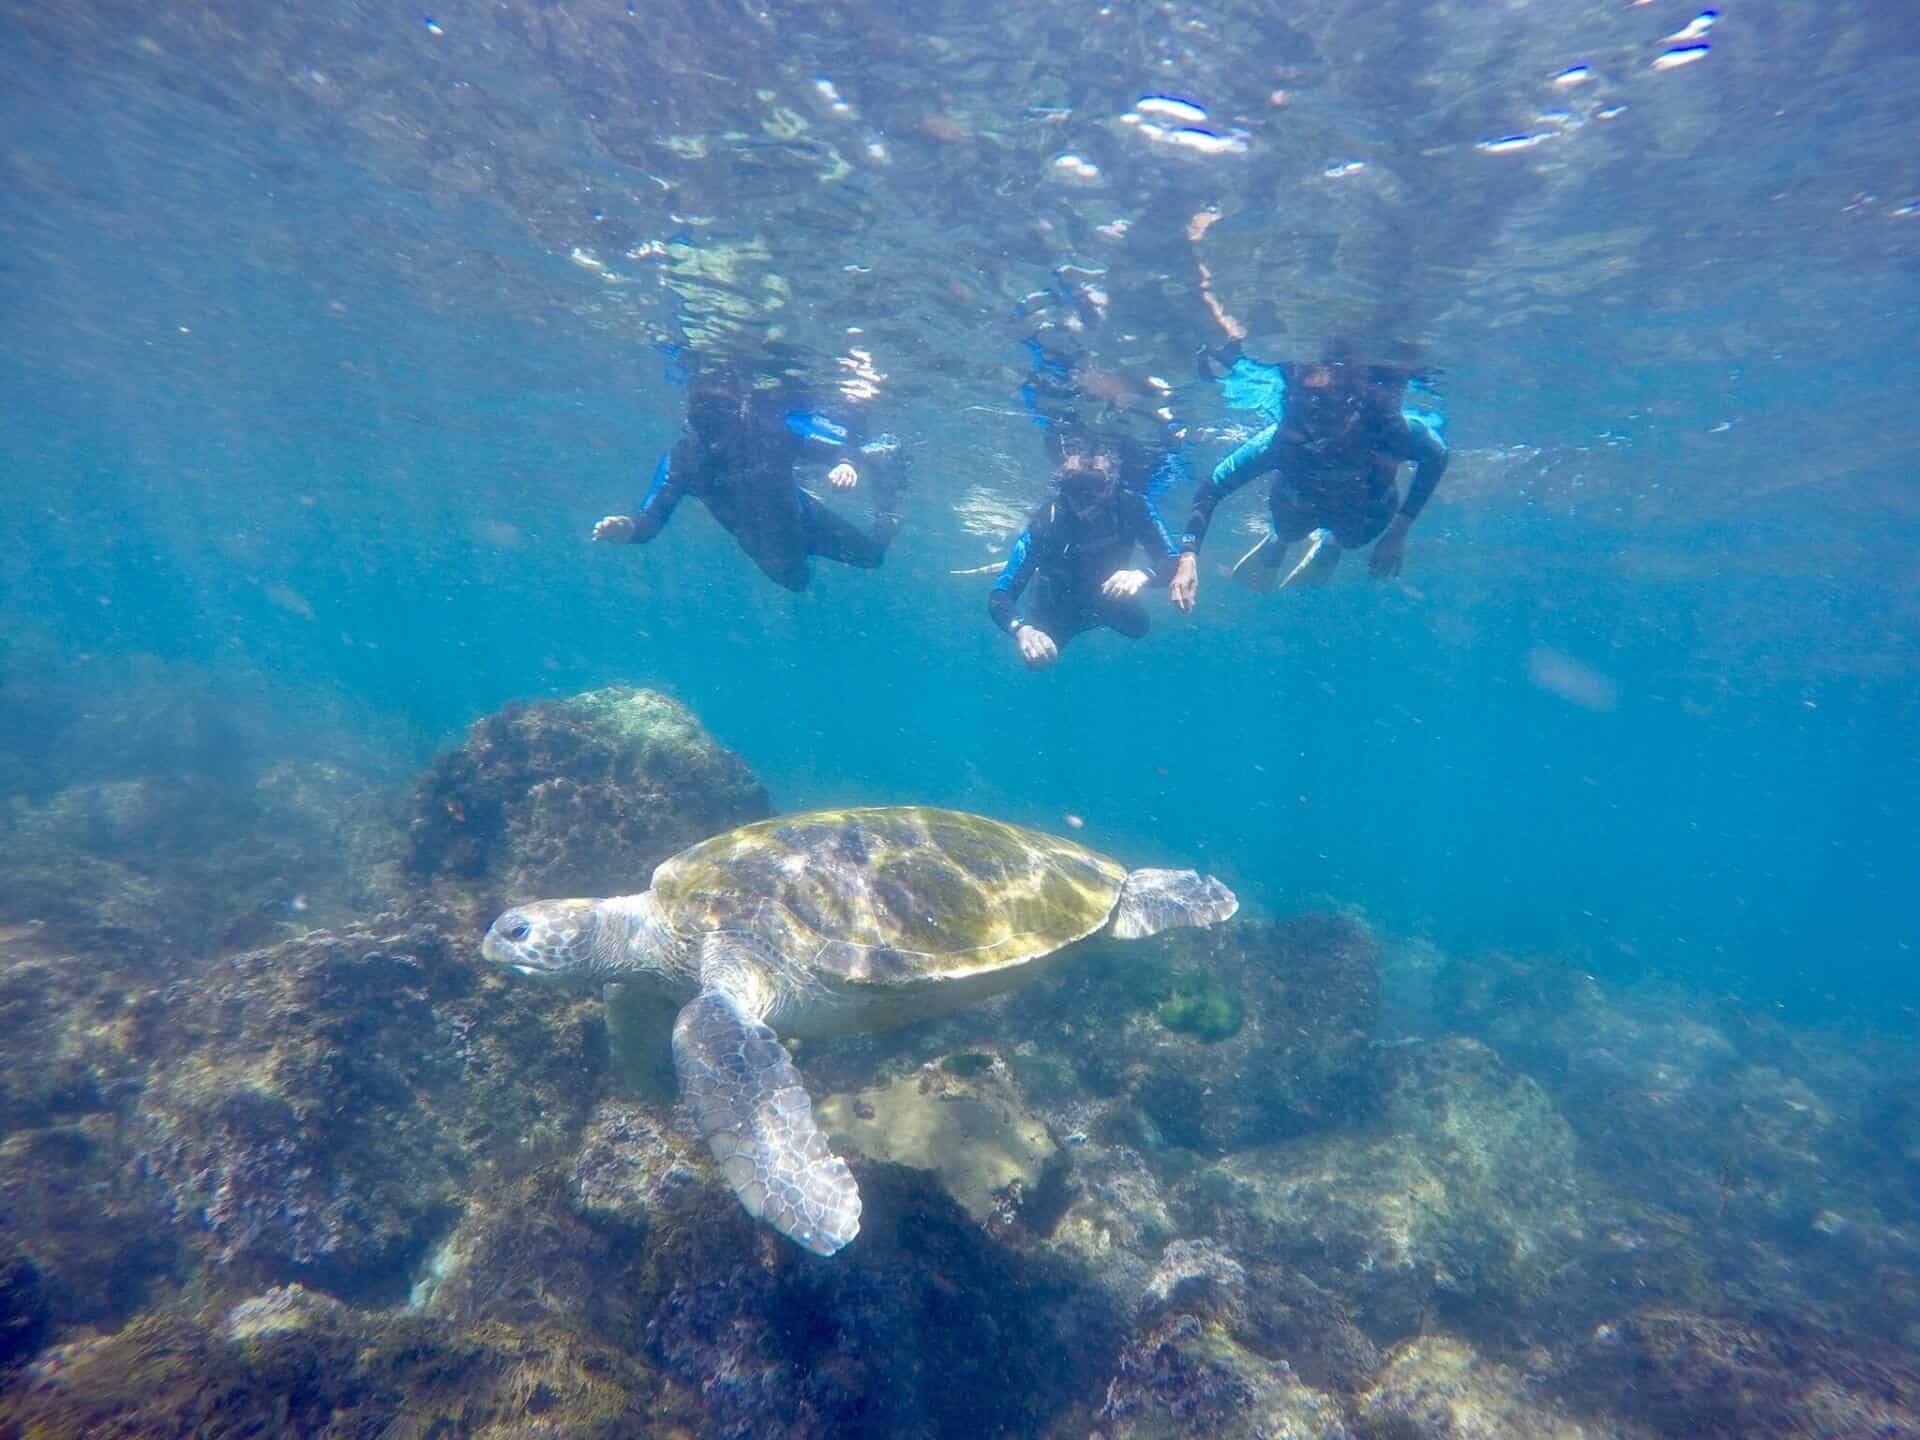 Snorkeling with a green turtle at the Cook Island Aquatic Reserve